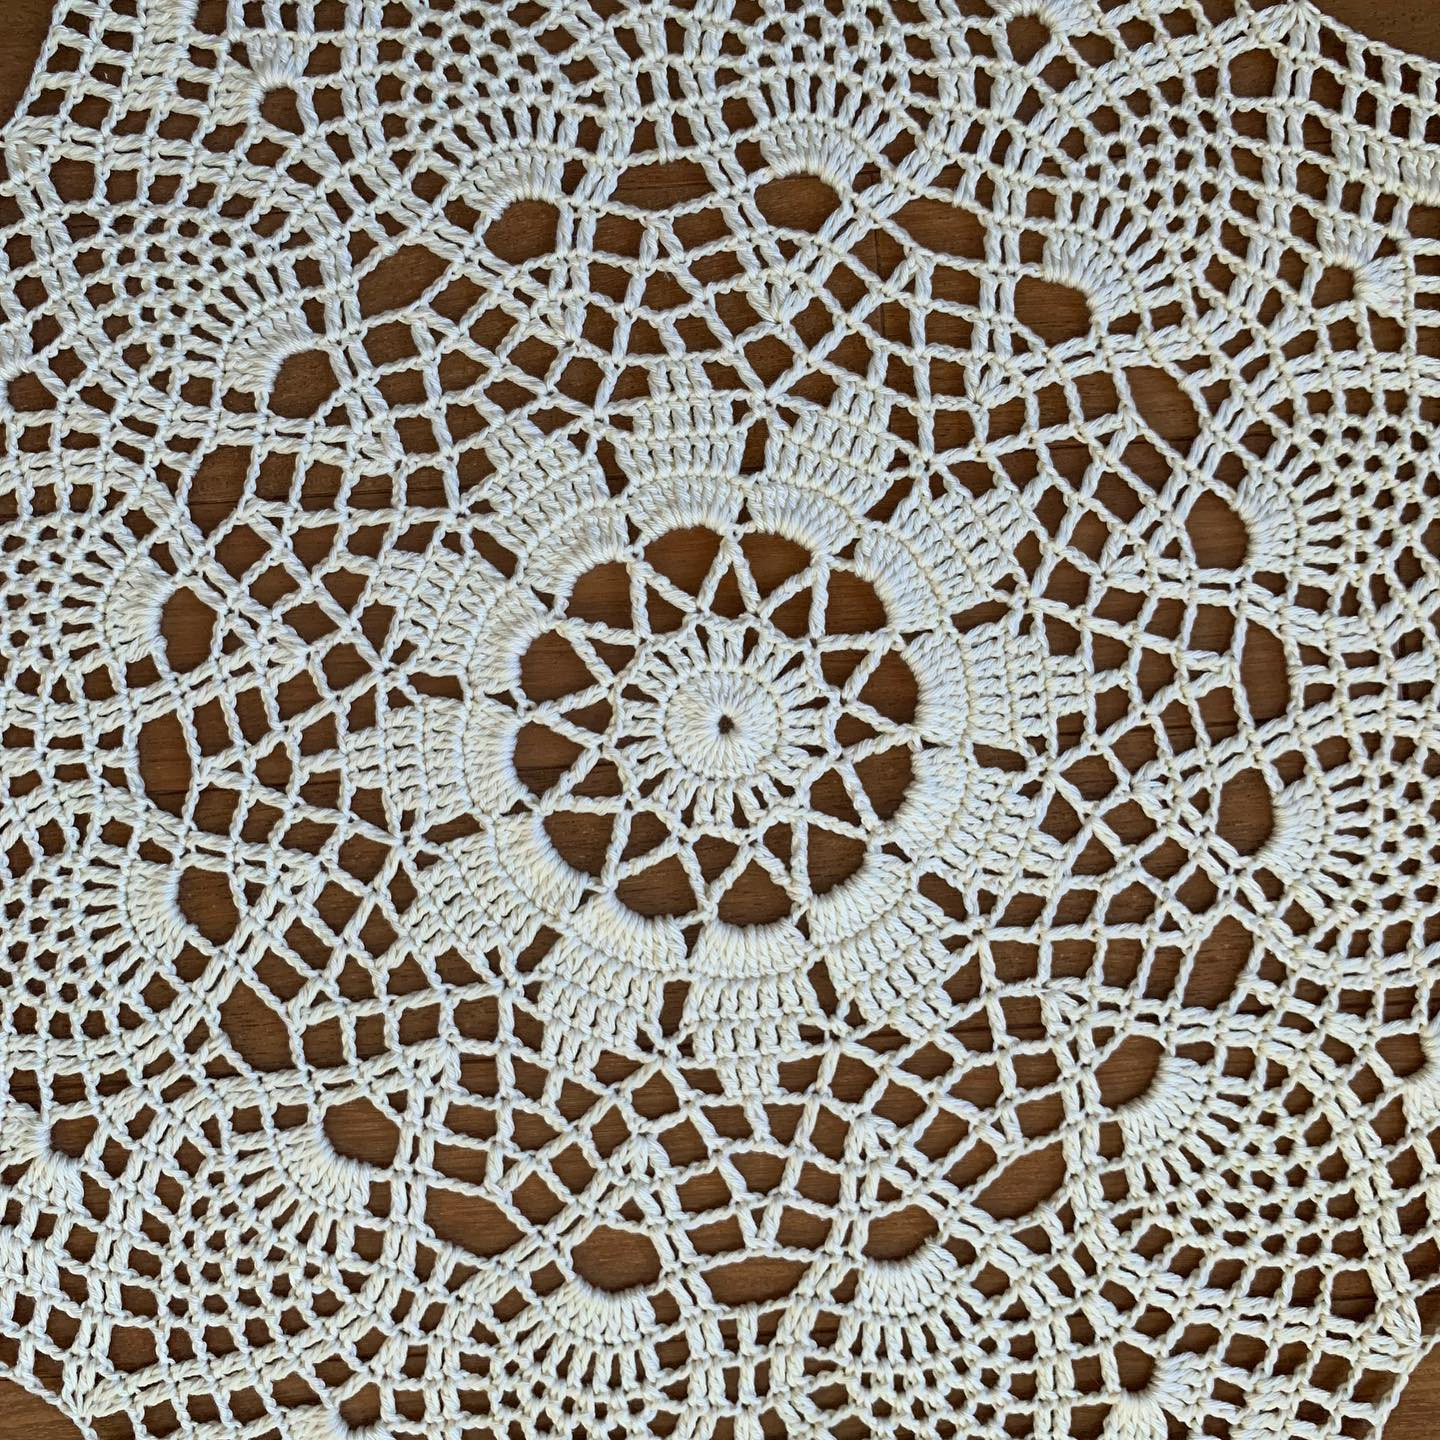 free crochet pattern circle with twelve spikes in the center with a circle